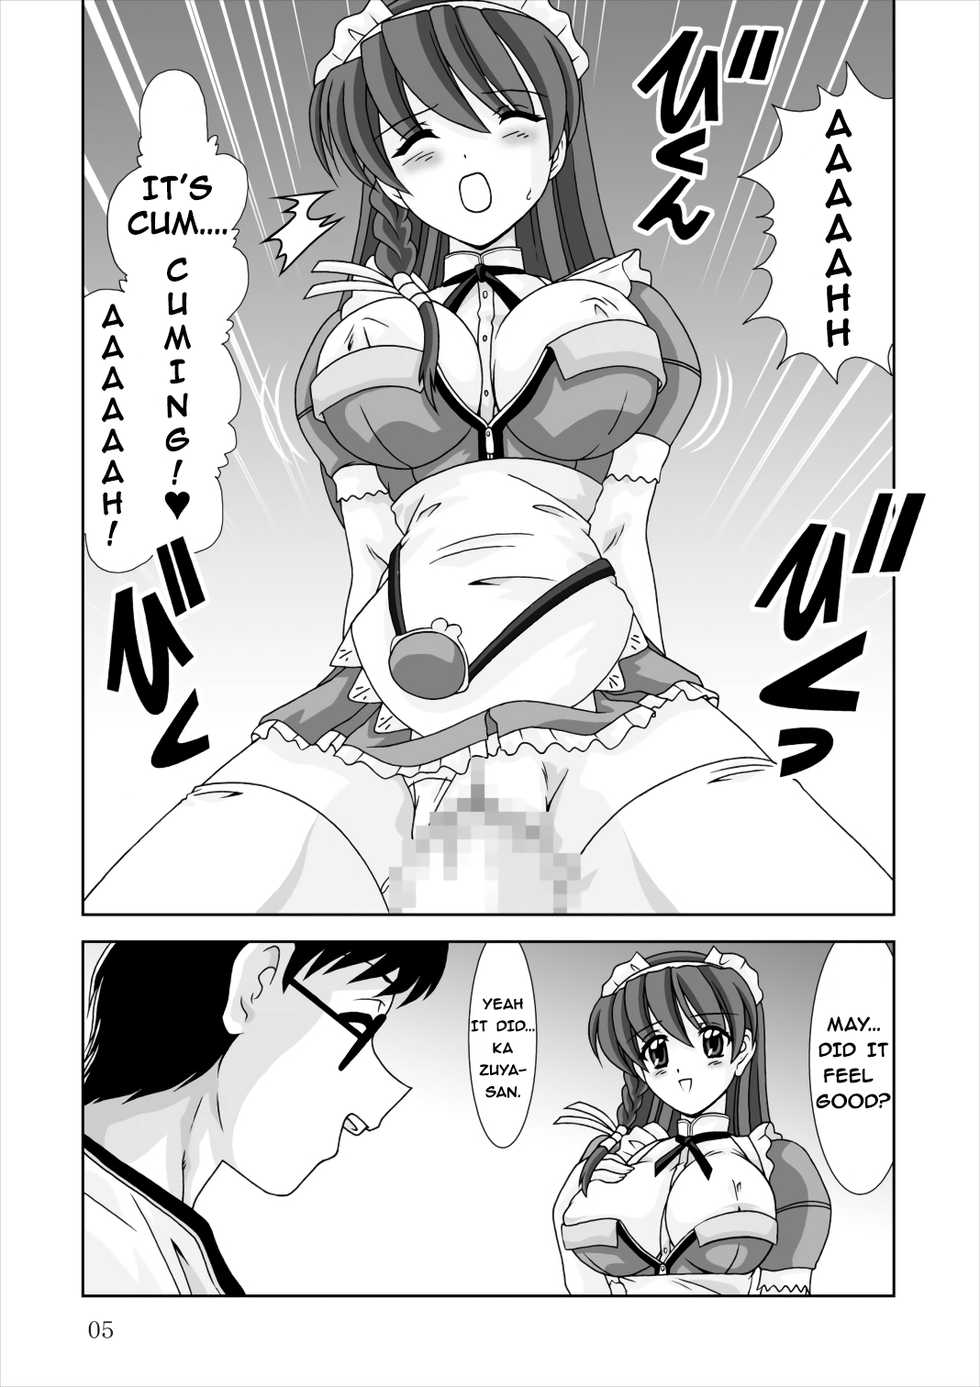 [Mental Specialist (Watanabe Yoshimasa)] Shiboritate | May I Offer a Squeeze? (Hand Maid May) [English] [EHCOVE] [Digital] - Page 5